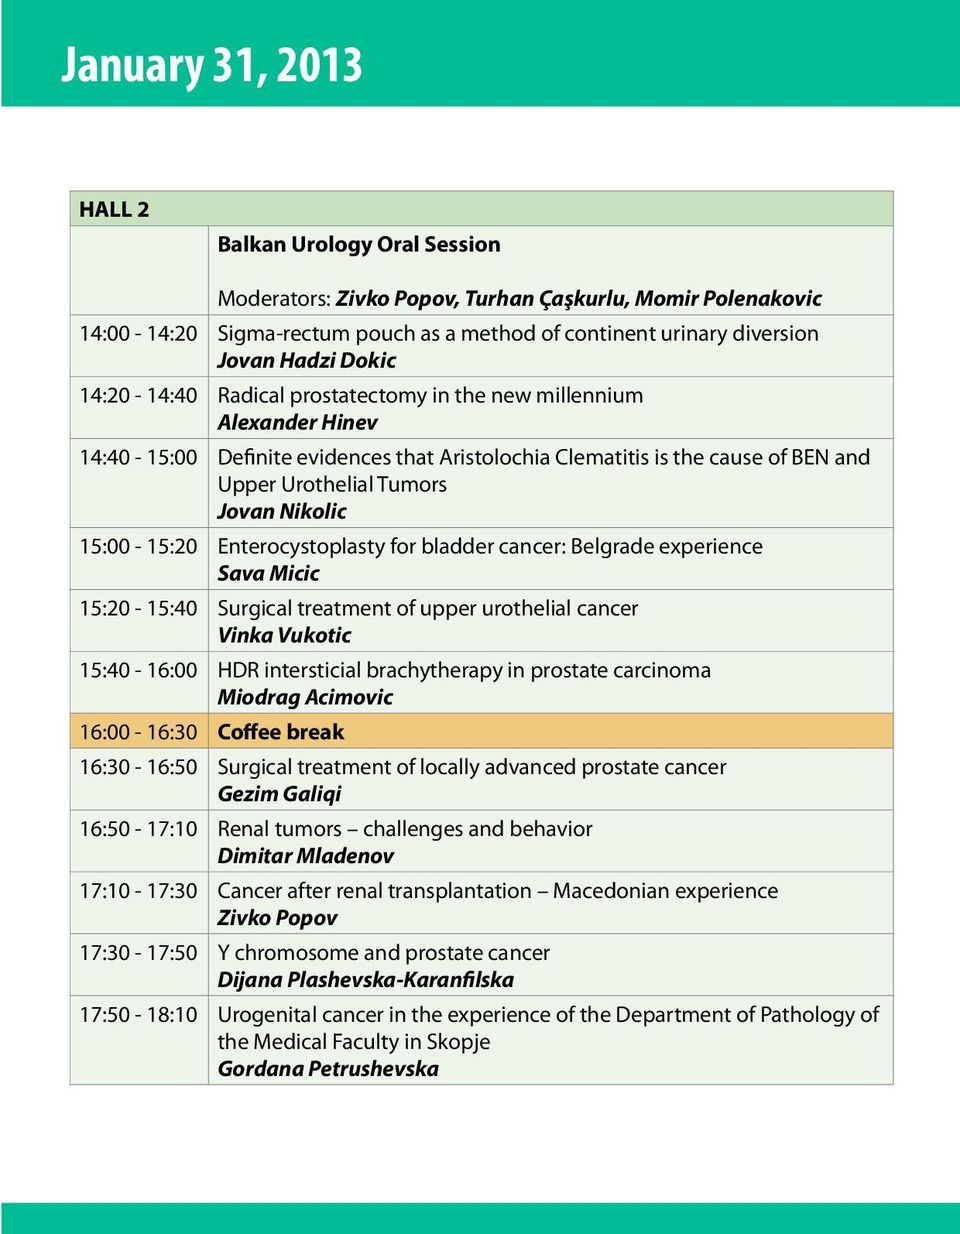 15:00-15:20 Enterocystoplasty for bladder cancer: Belgrade experience Sava Micic 15:20-15:40 Surgical treatment of upper urothelial cancer Vinka Vukotic 15:40-16:00 HDR intersticial brachytherapy in